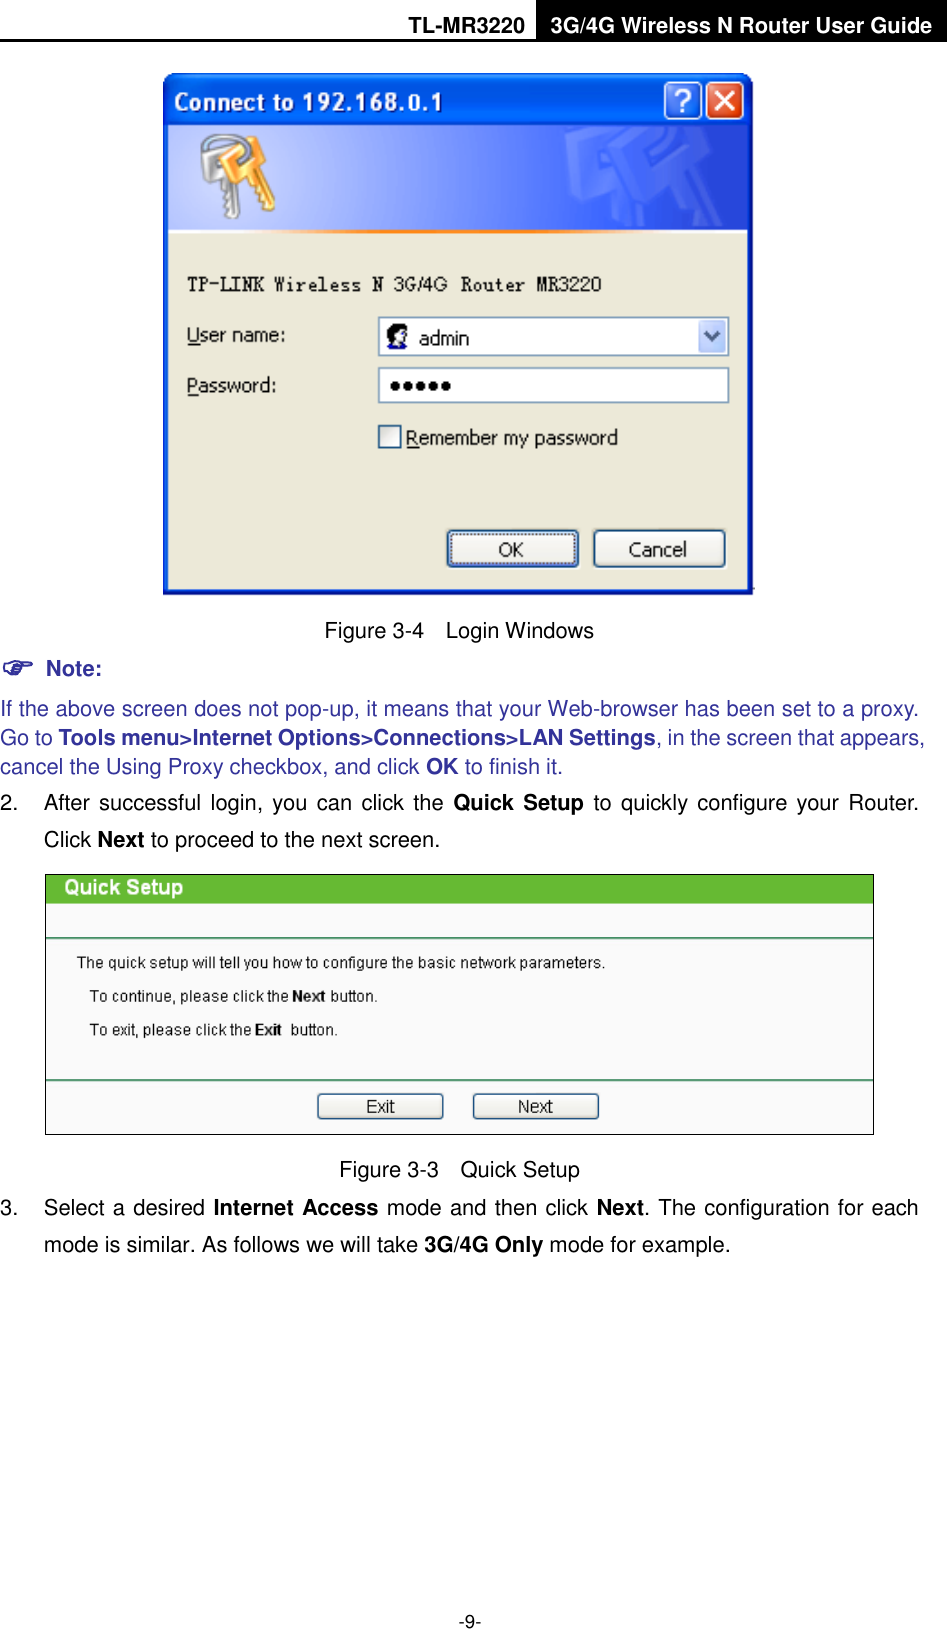 TL-MR3220 3G/4G Wireless N Router User Guide  -9-  Figure 3-4  Login Windows  Note: If the above screen does not pop-up, it means that your Web-browser has been set to a proxy. Go to Tools menu&gt;Internet Options&gt;Connections&gt;LAN Settings, in the screen that appears, cancel the Using Proxy checkbox, and click OK to finish it. 2.  After successful login, you can click the  Quick Setup  to quickly configure your  Router. Click Next to proceed to the next screen.  Figure 3-3  Quick Setup 3.  Select a desired Internet Access mode and then click Next. The configuration for each mode is similar. As follows we will take 3G/4G Only mode for example. 